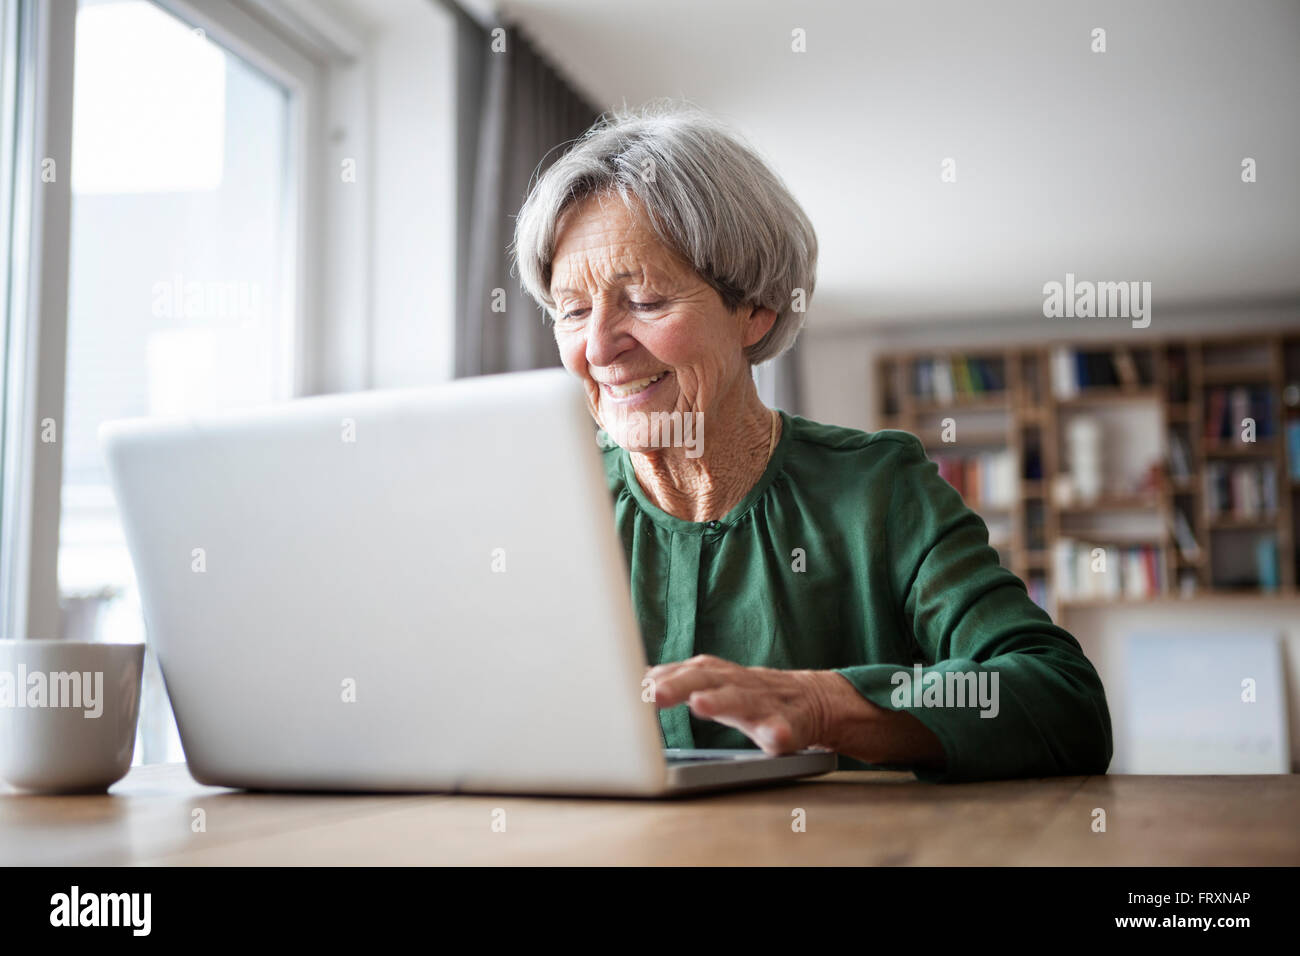 Portrait of senior woman using laptop at home Stock Photo